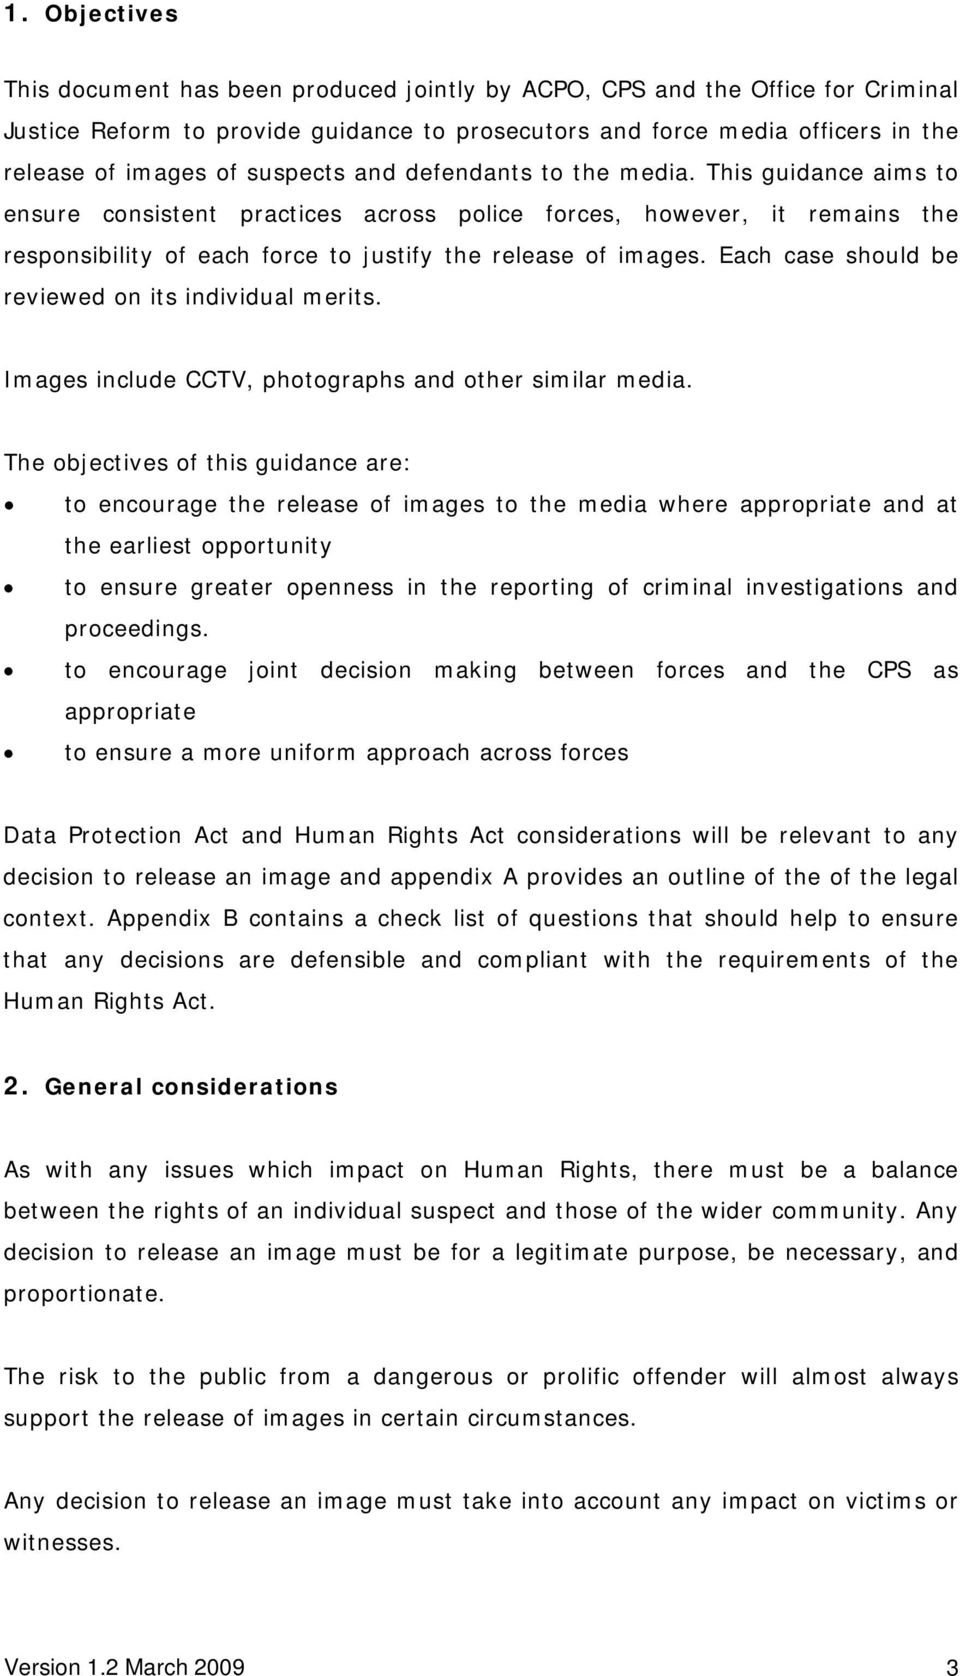 Each case should be reviewed on its individual merits. Images include CCTV, photographs and other similar media.